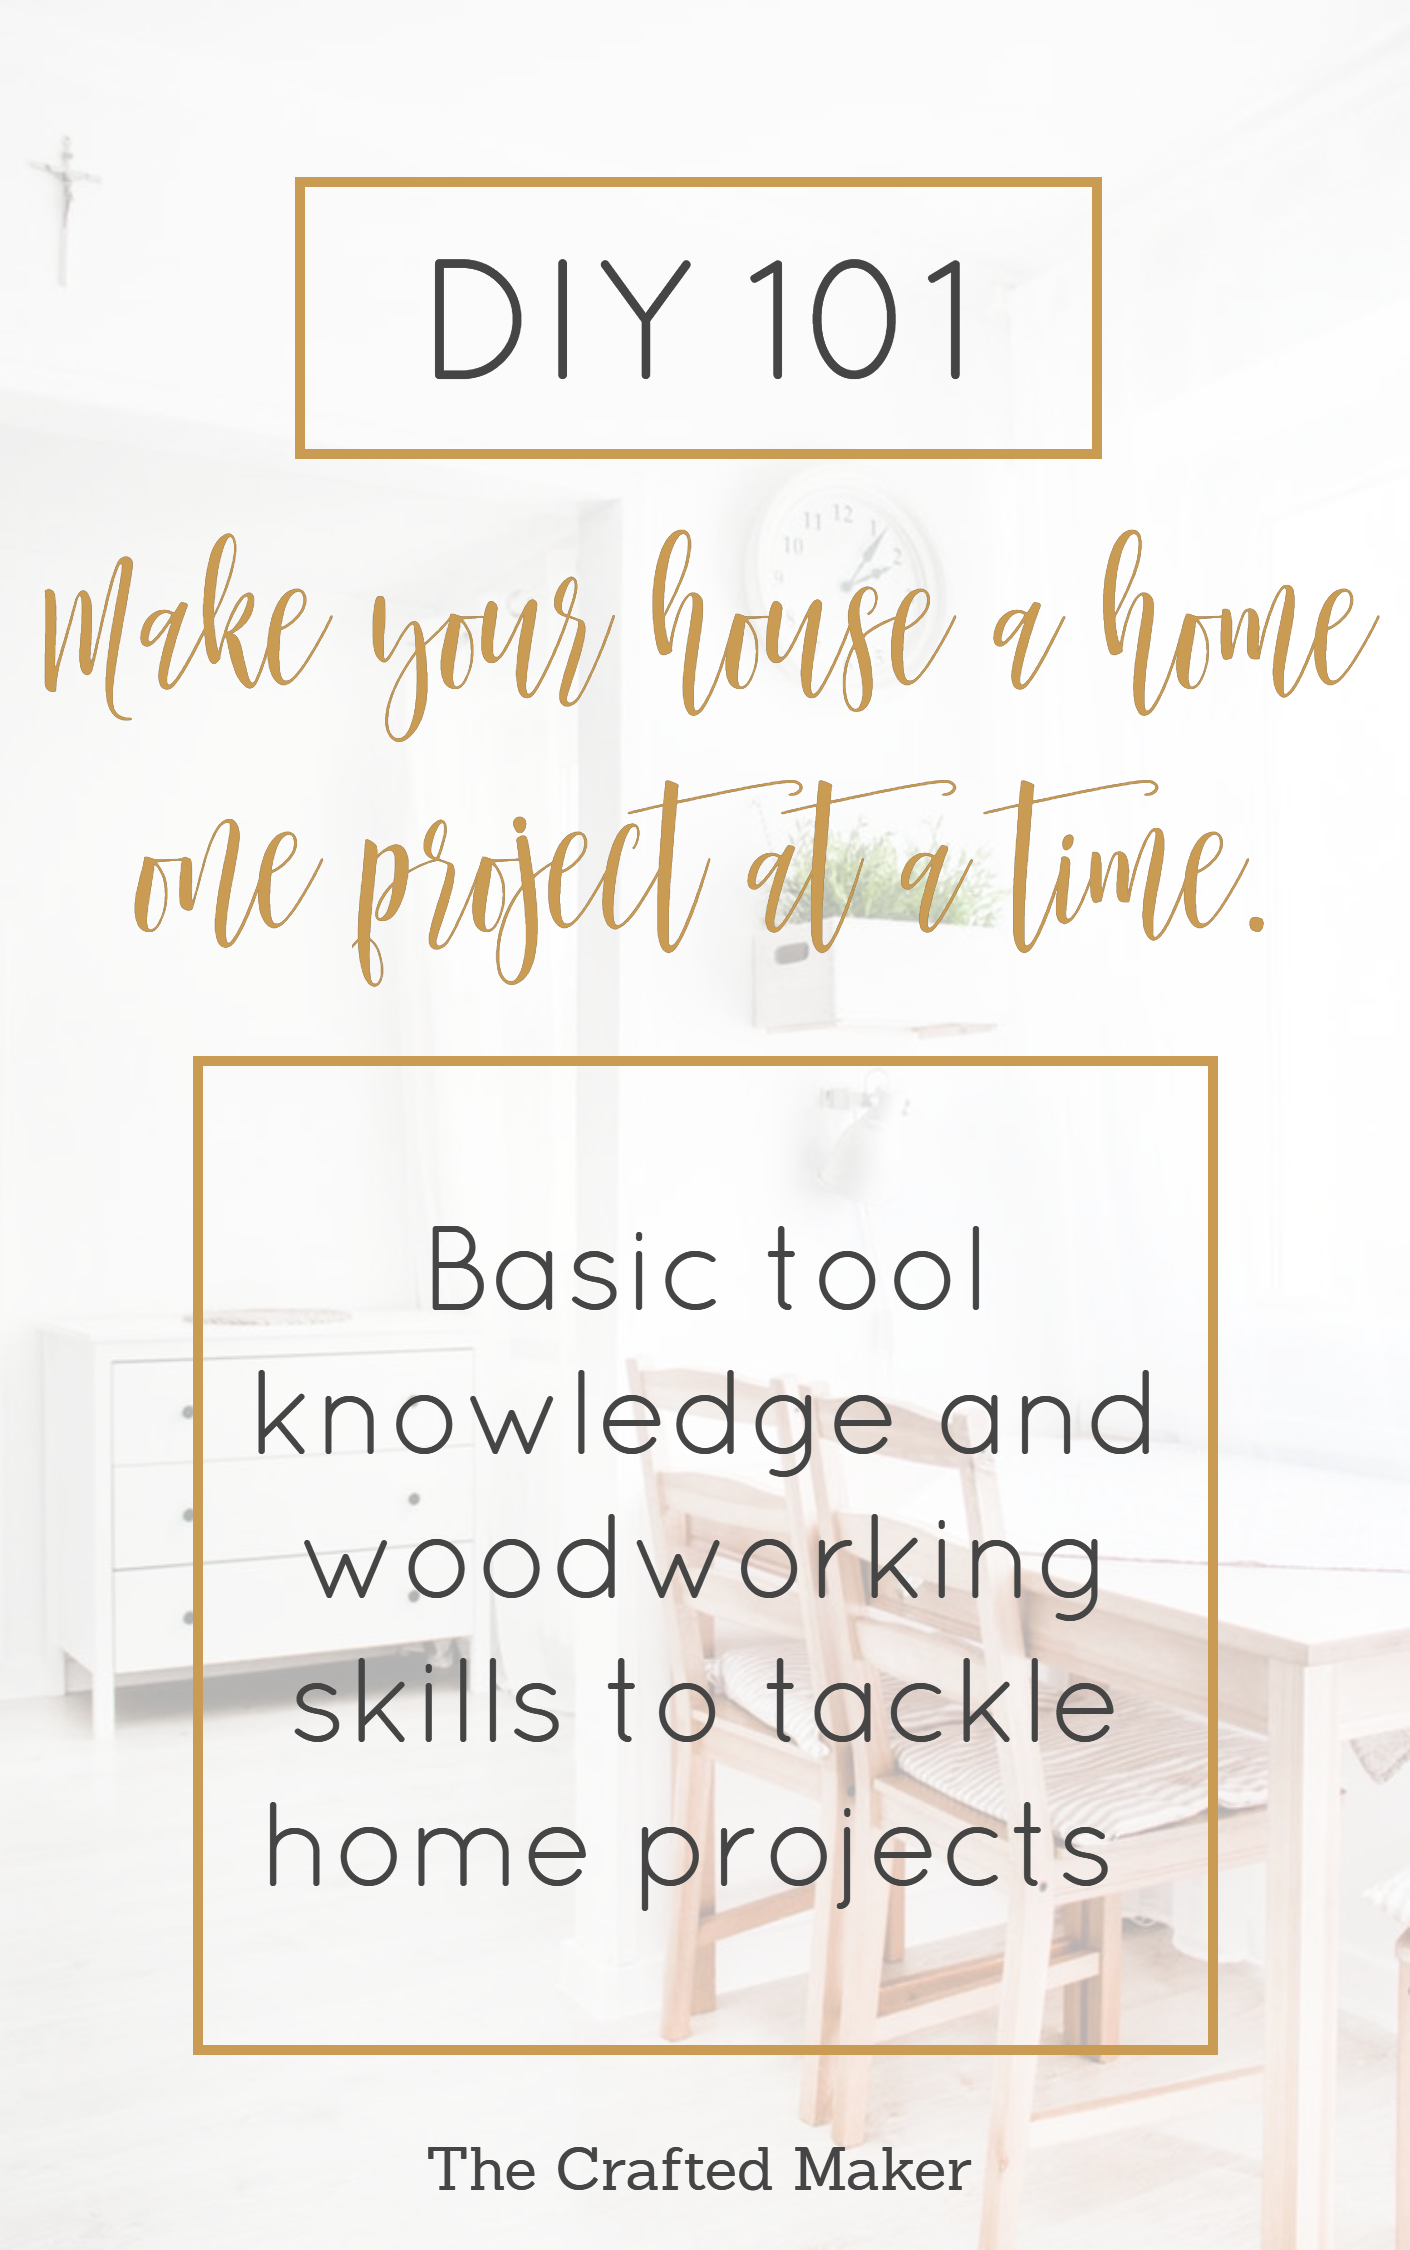 Starting any DIY project can sometimes seem like a lot to take on, but with the proper tools and know how, you can accomplish any project! Let's DIY!